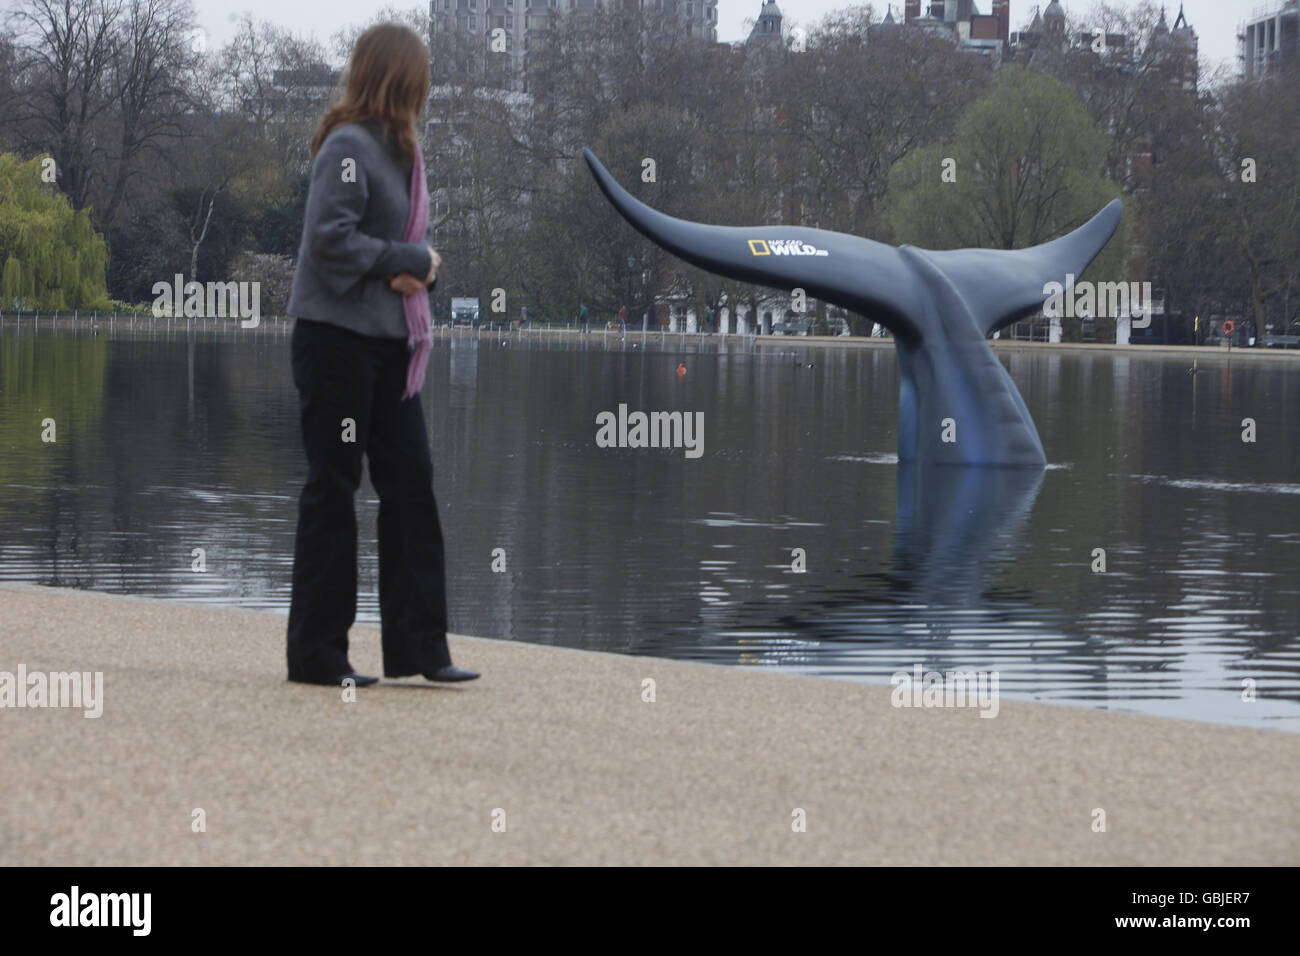 A 10 ft high, 20 ft wide life size model of a Blue Whale tail, commissioned by the National Geographic Channel, in the Serpentine in London's Hyde Park to celebrate the premiere of Blue Whale Odyssey and the launch of its new channel, Nat Geo Wild HD. Stock Photo